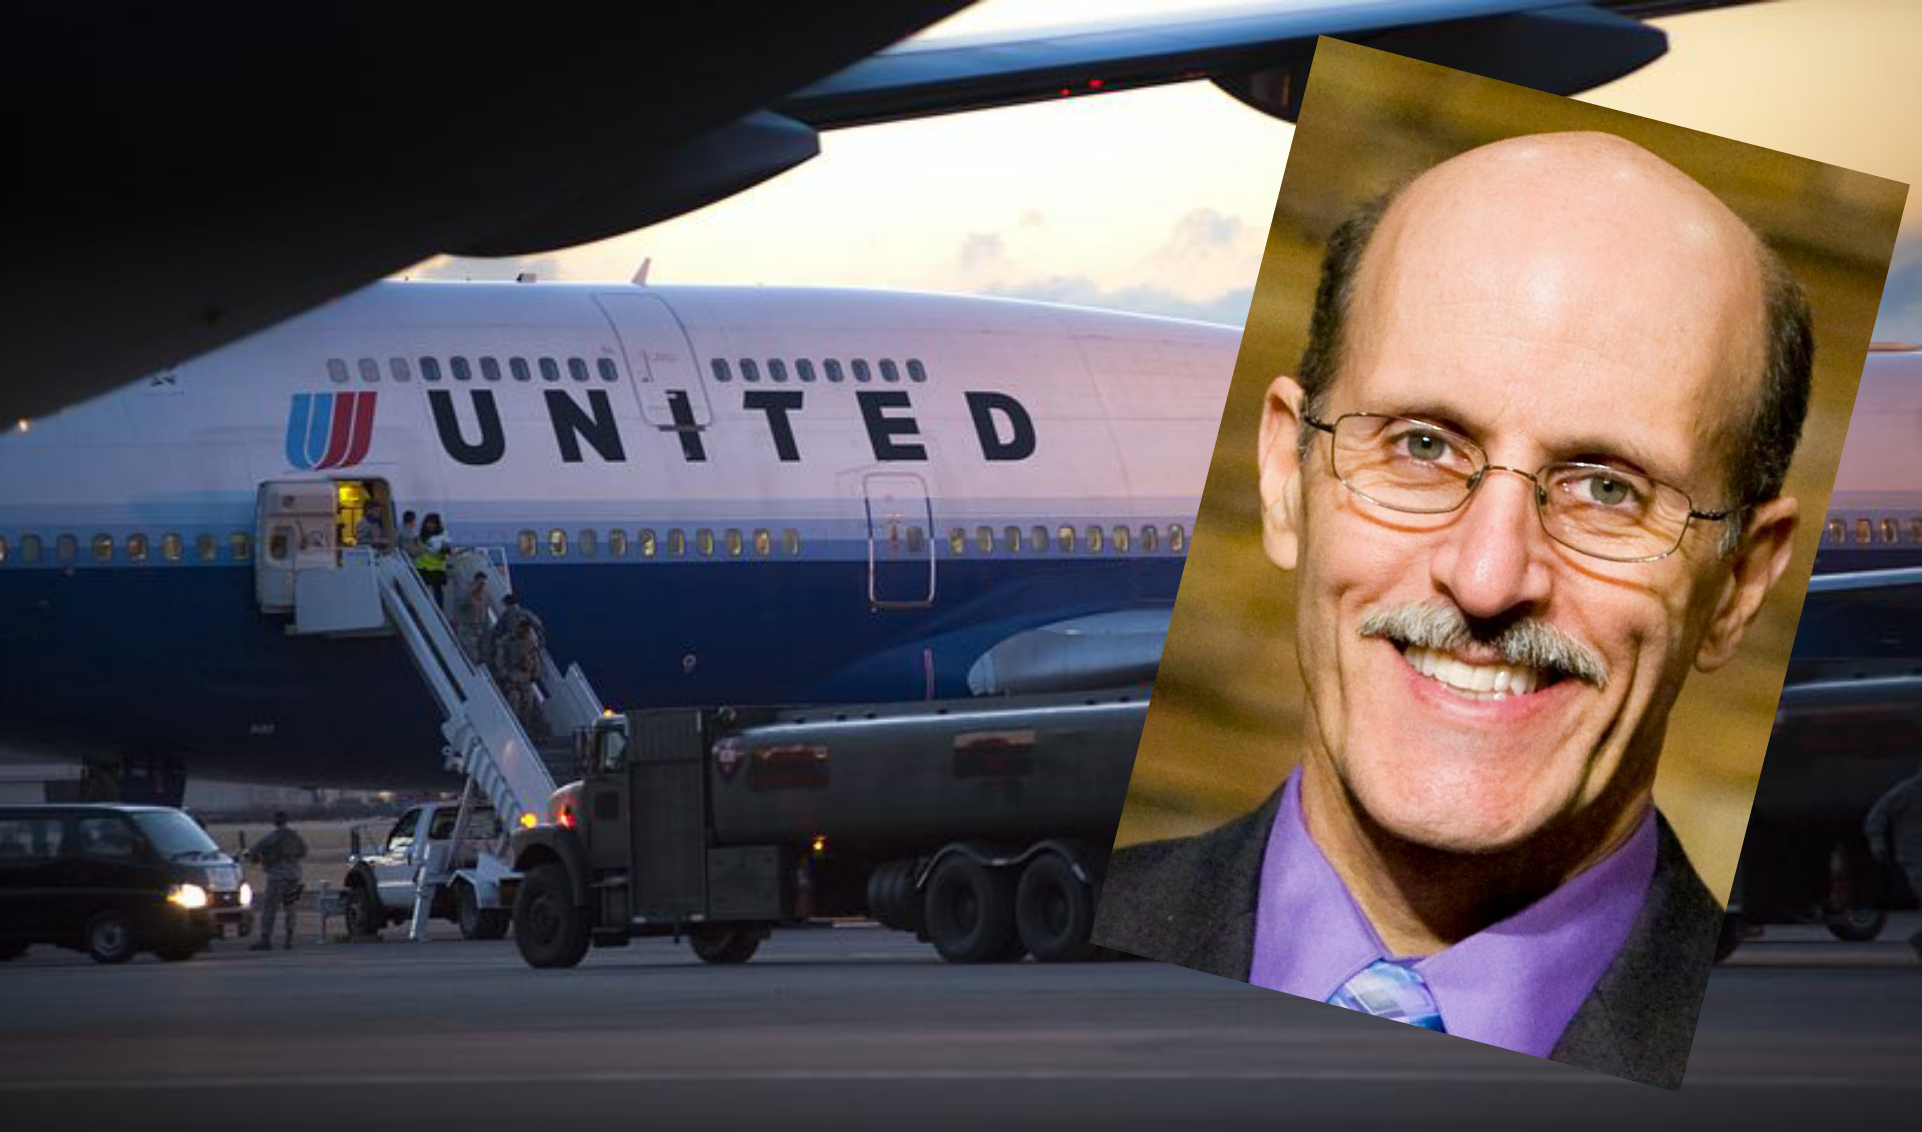 United removes Doug Batchelor from plane for carrying “Sword of the Spirit”